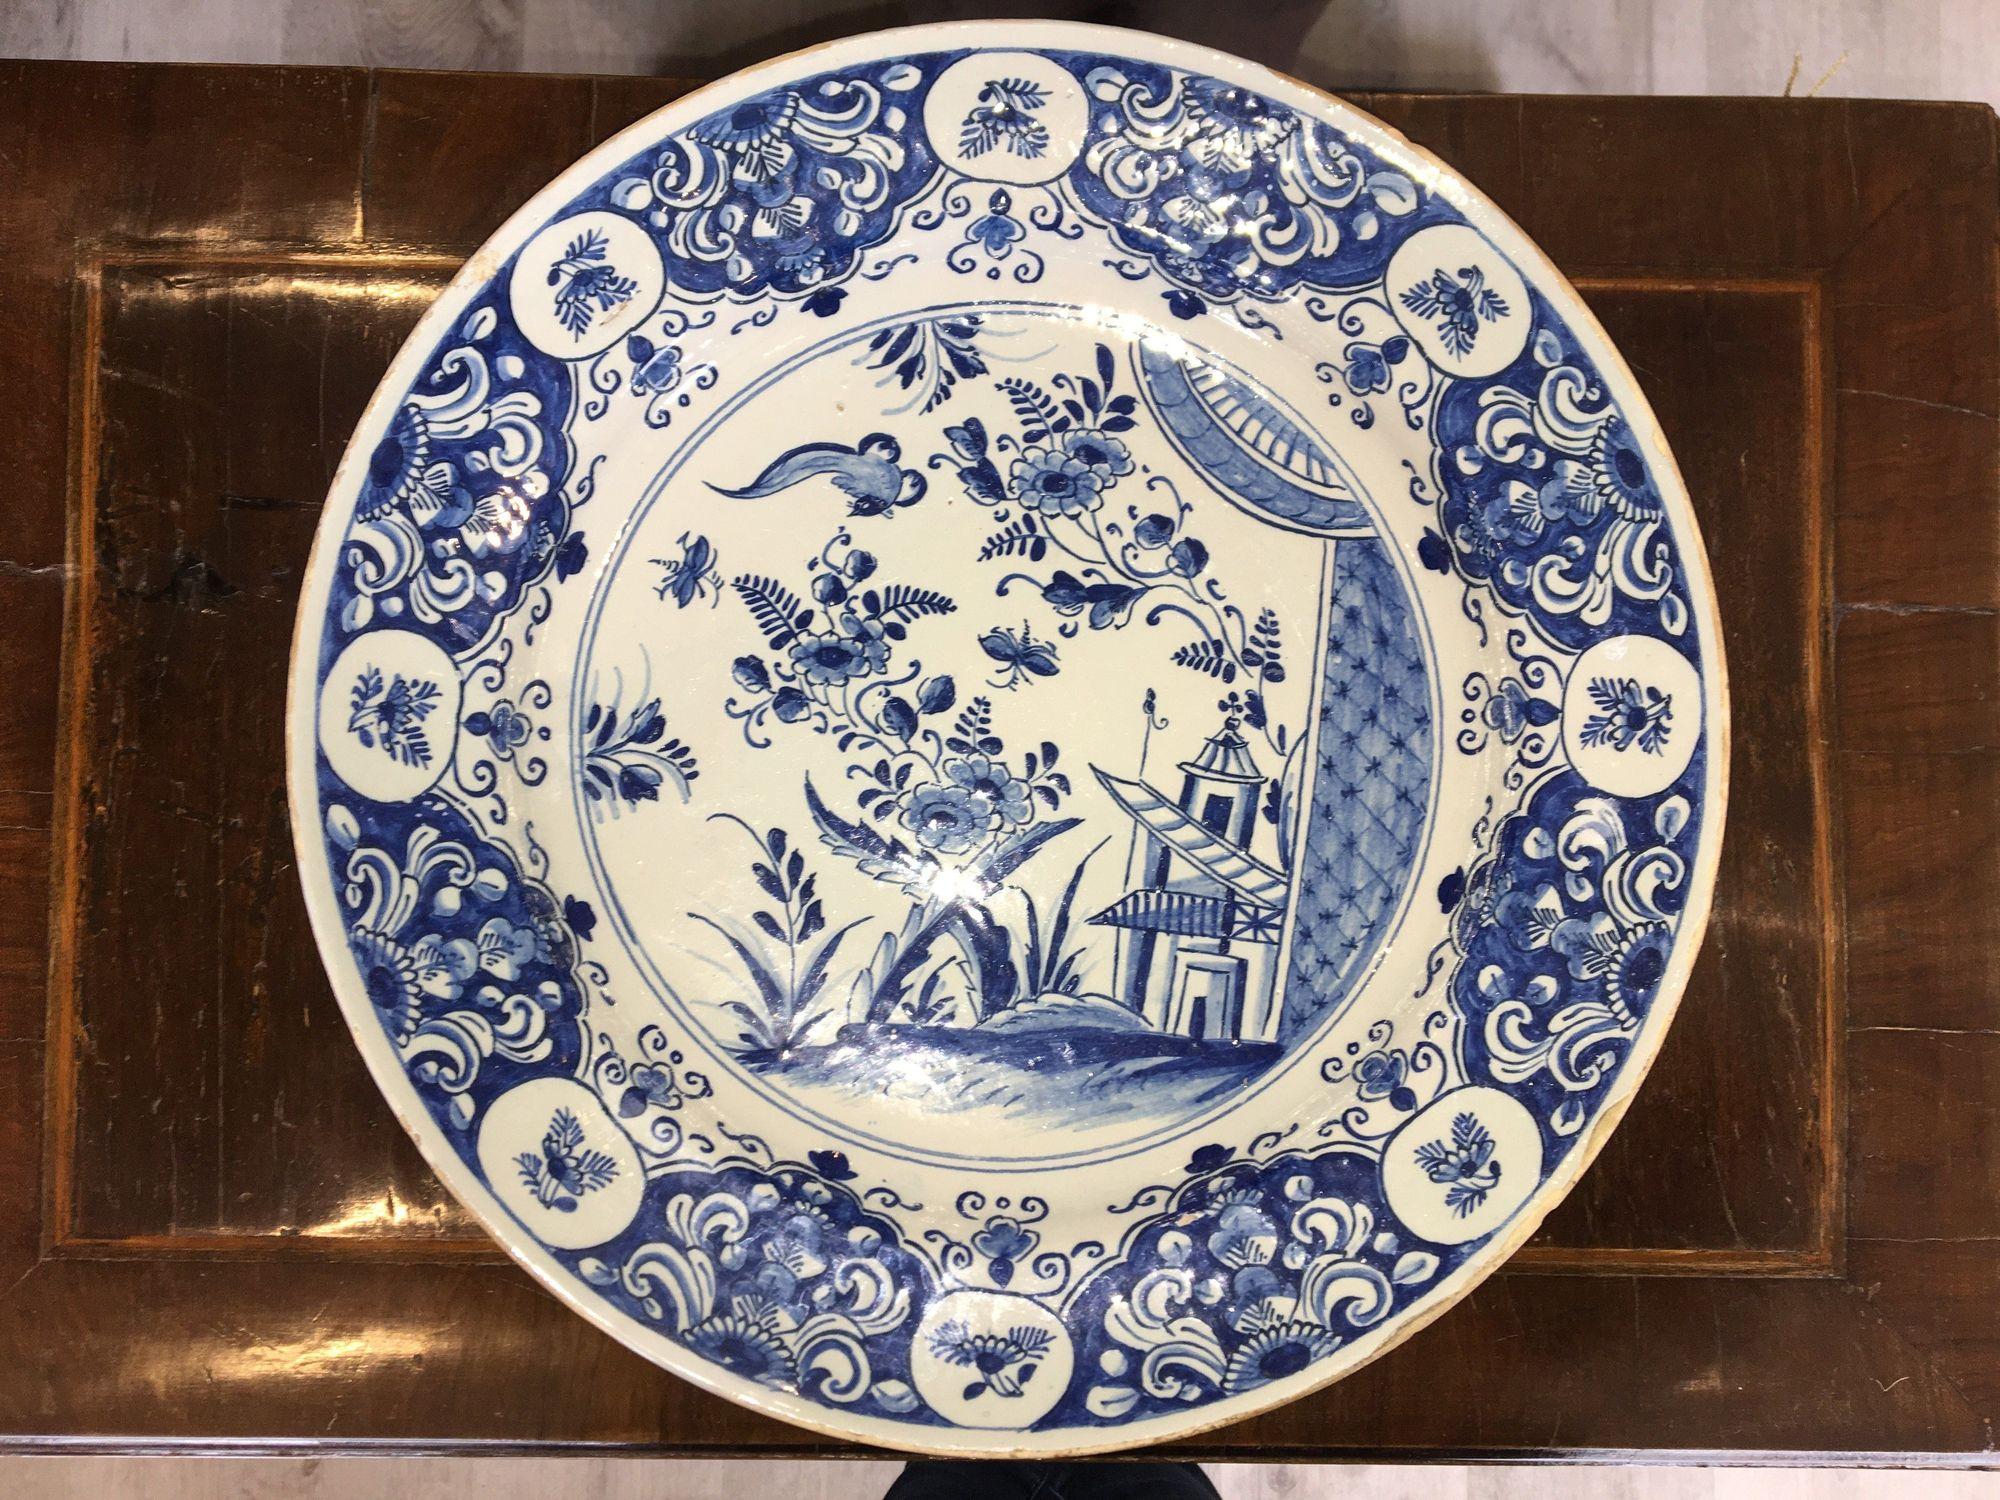 Dutch Delft Charger, 18th century, with chinoiserie bird, floral and building decoration, rim with scroll and paneled floral motifs, blue swirl mark on base, 14 1/8